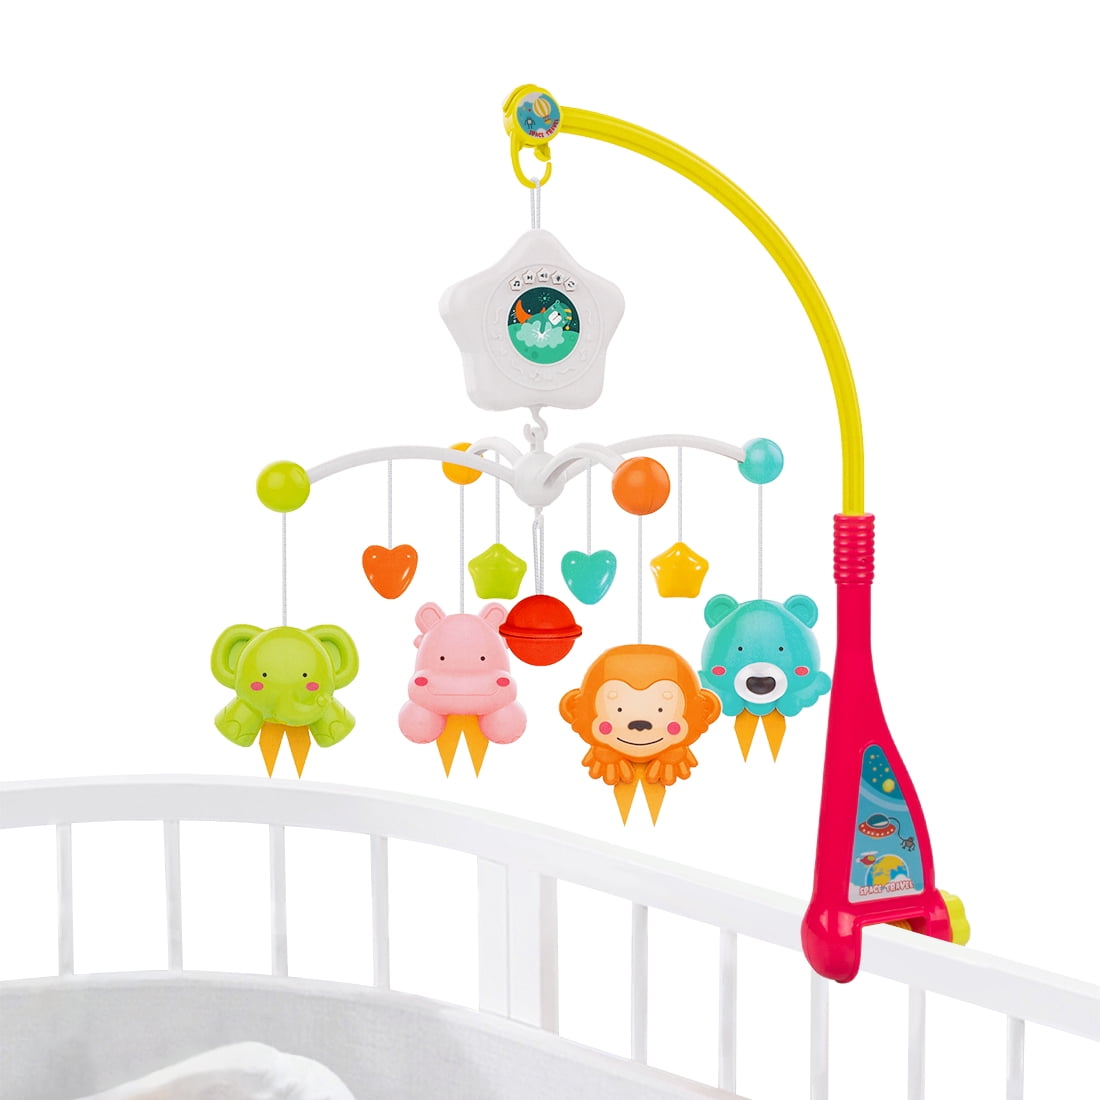 Over The Rainbow Pursuestar Baby Rotary Mobile Crib Bed Bell Toy Windup Clockwork Movement Music Box with Rotating Hook 